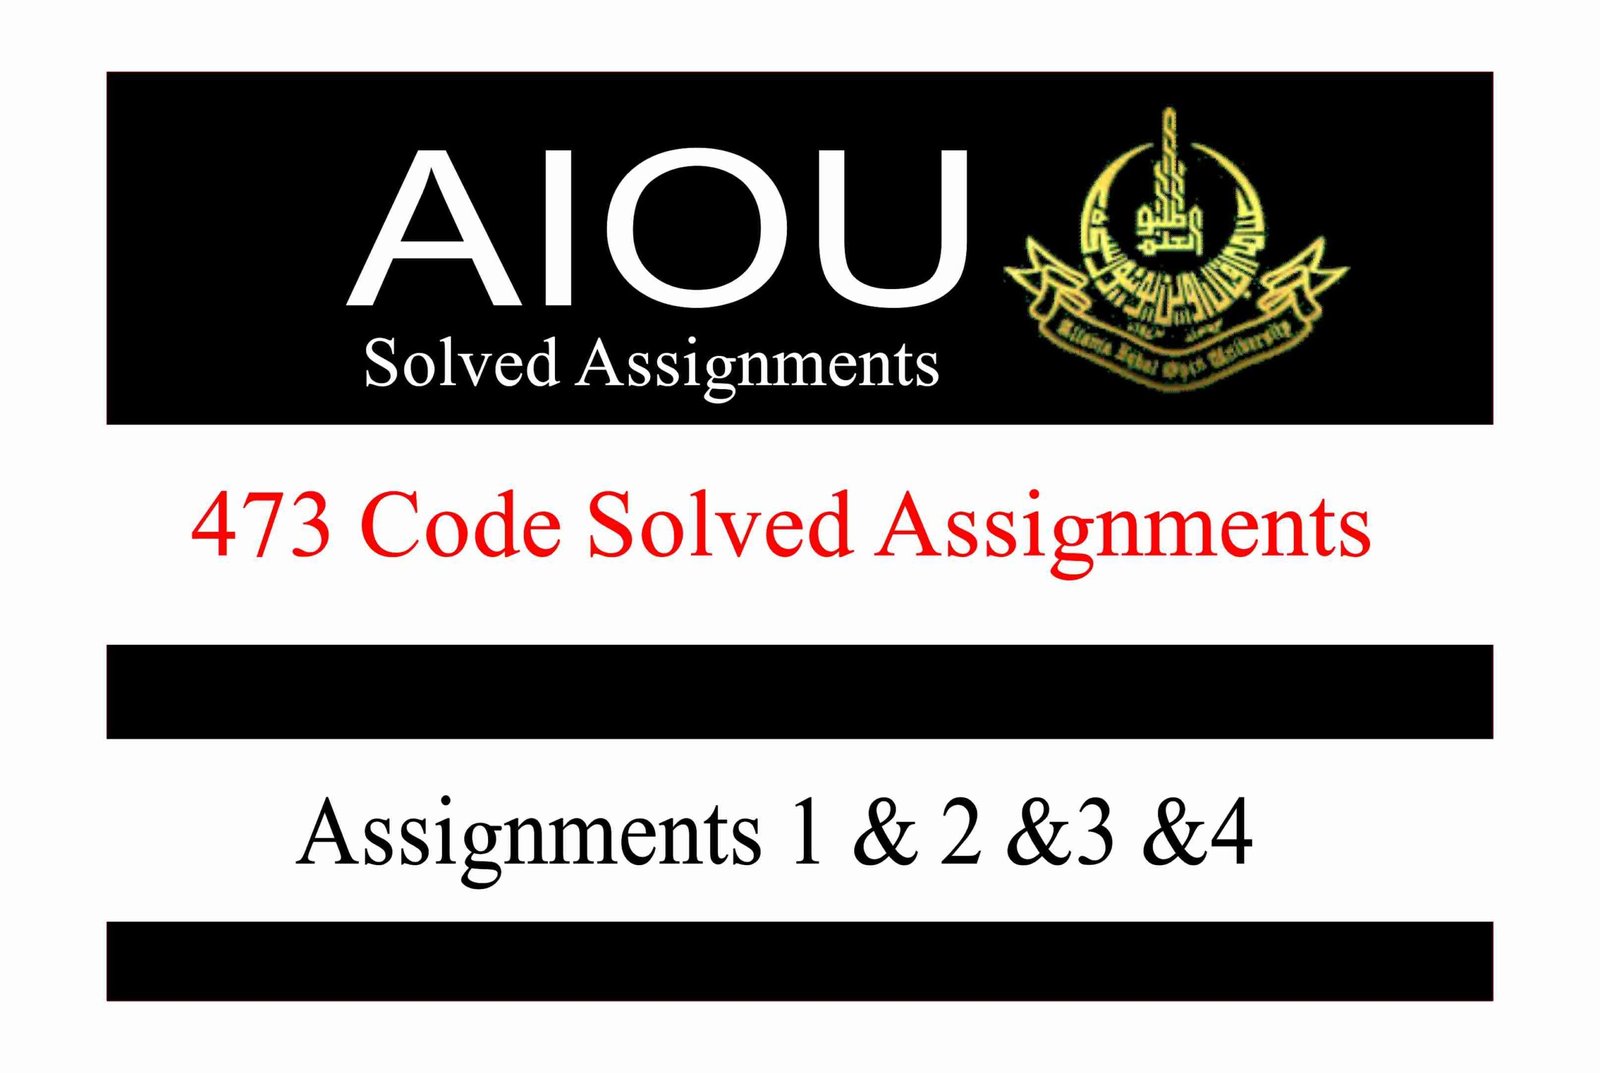 AIOU Course Code 473 Solved Assignments